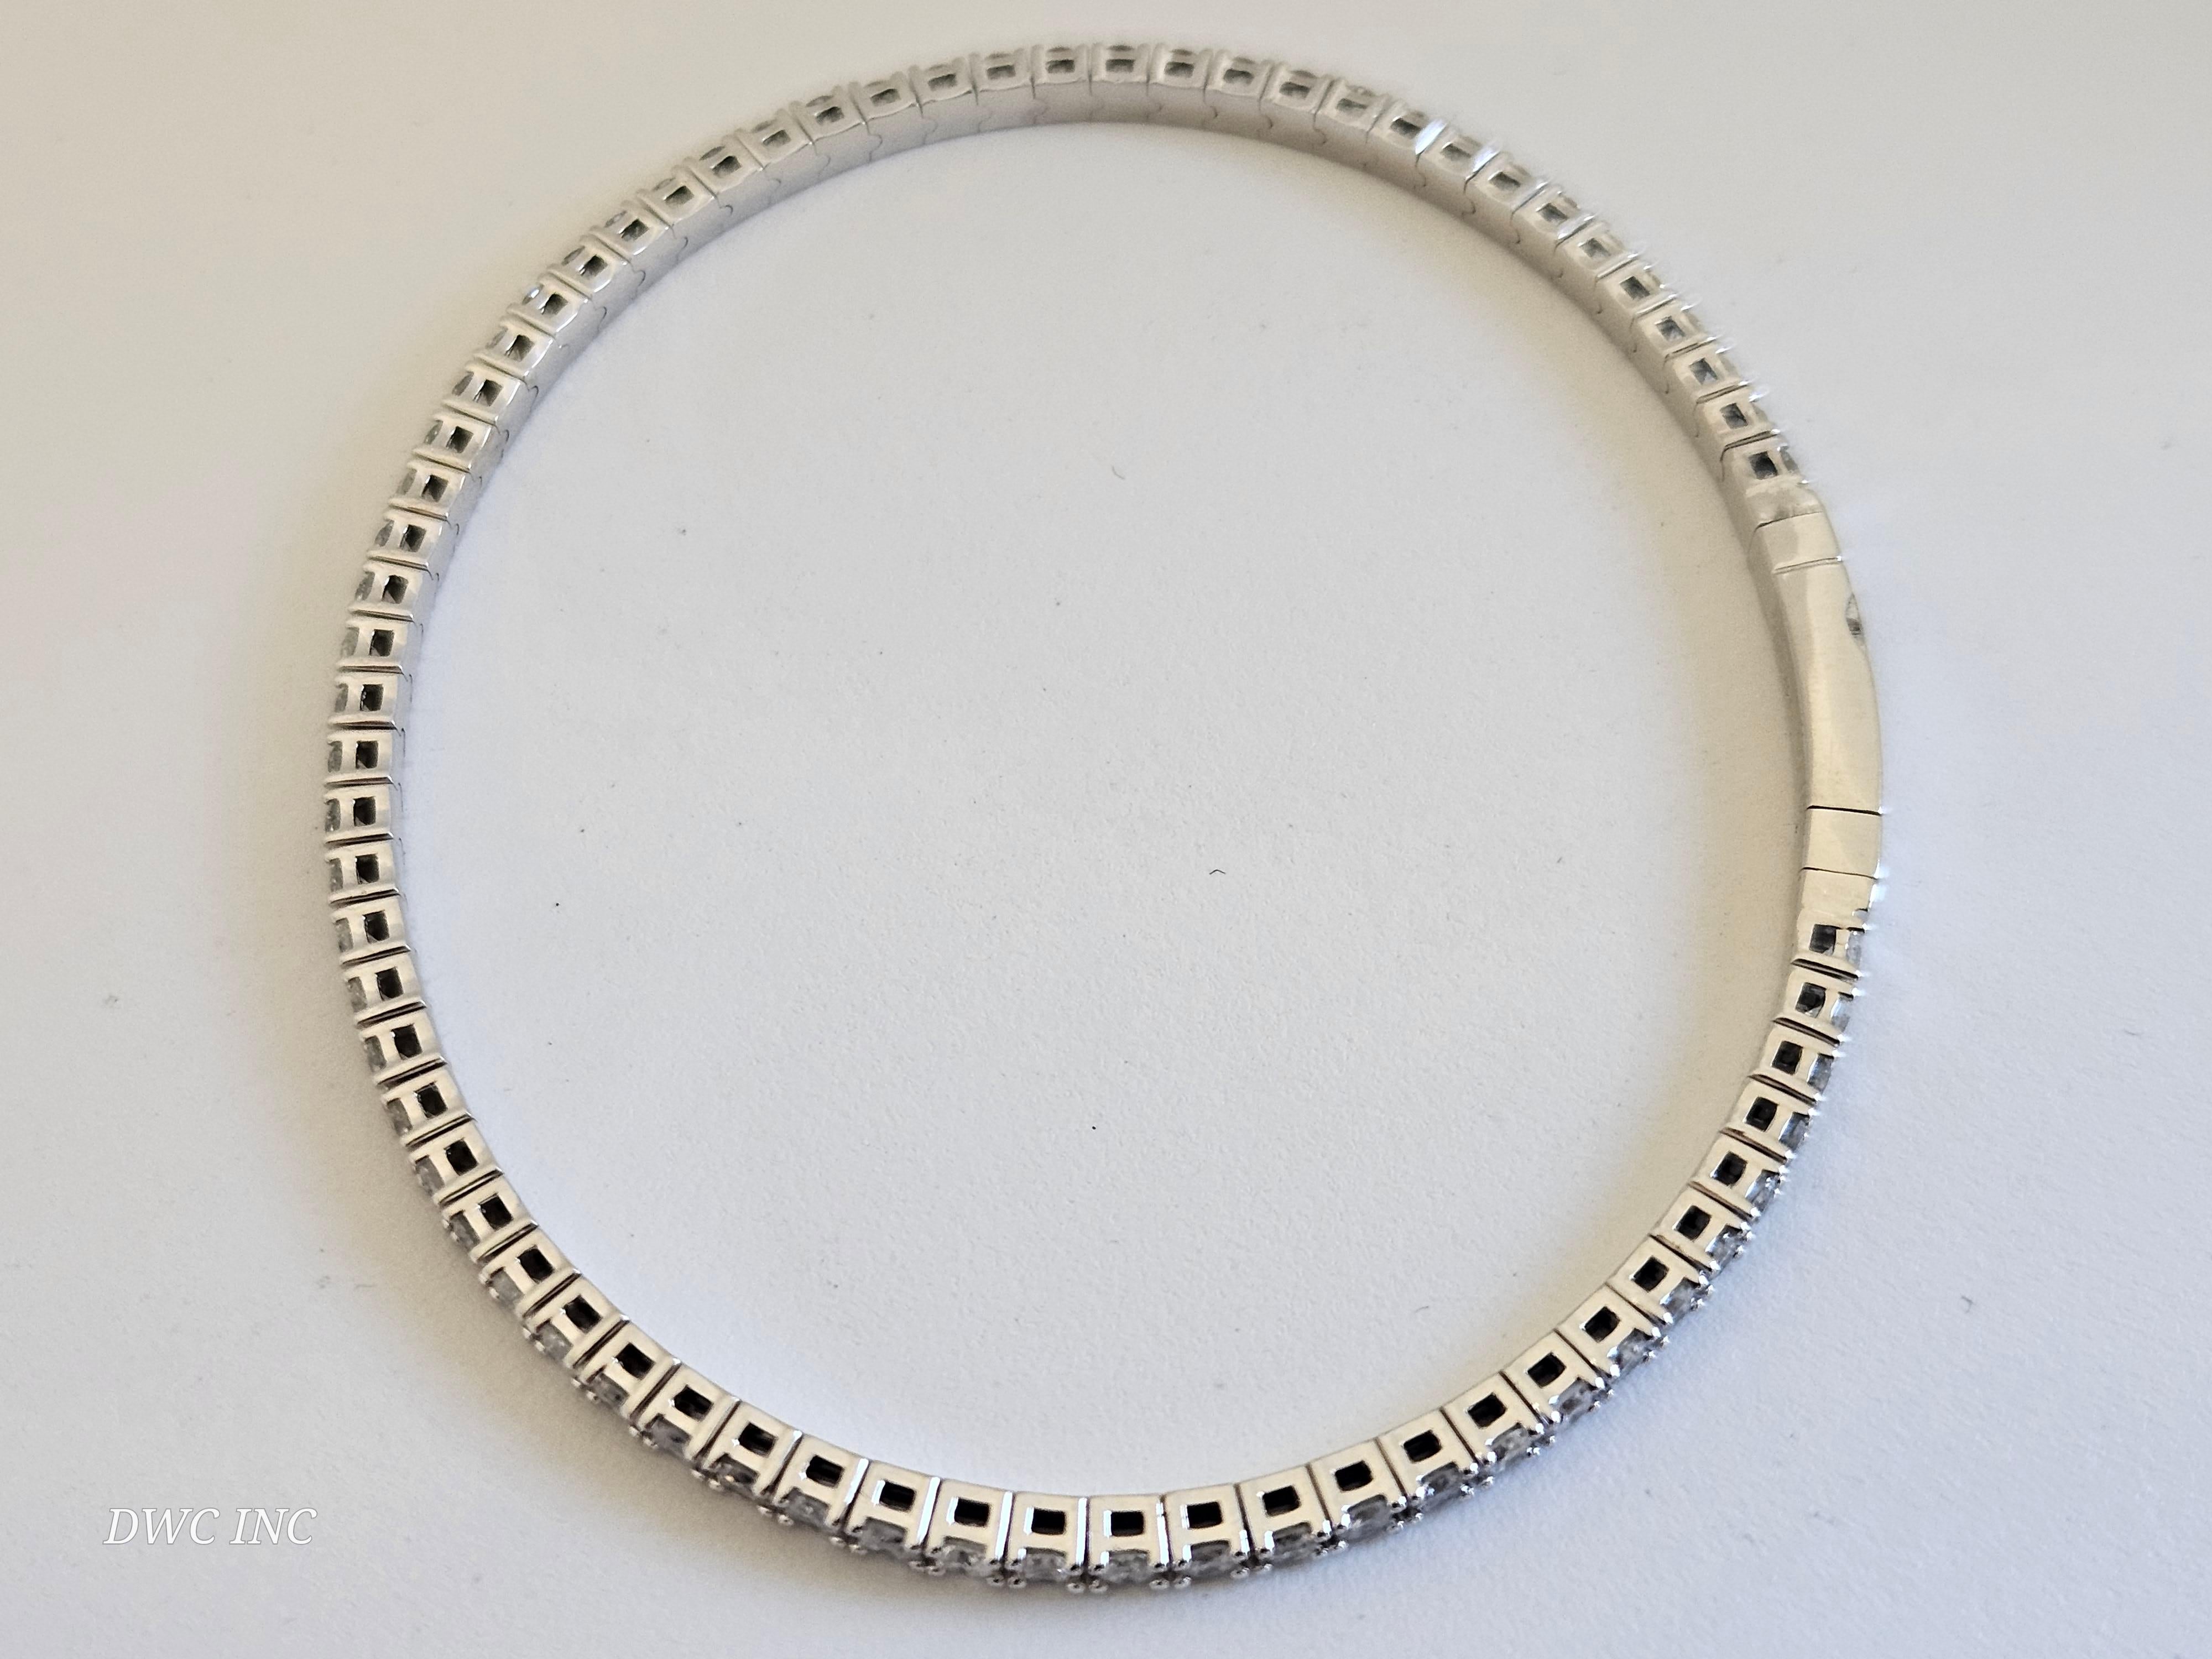 2.25 Carat Round Brilliant Cut Diamond Bangle Bracelet 14 Karat White Gold In New Condition For Sale In Great Neck, NY